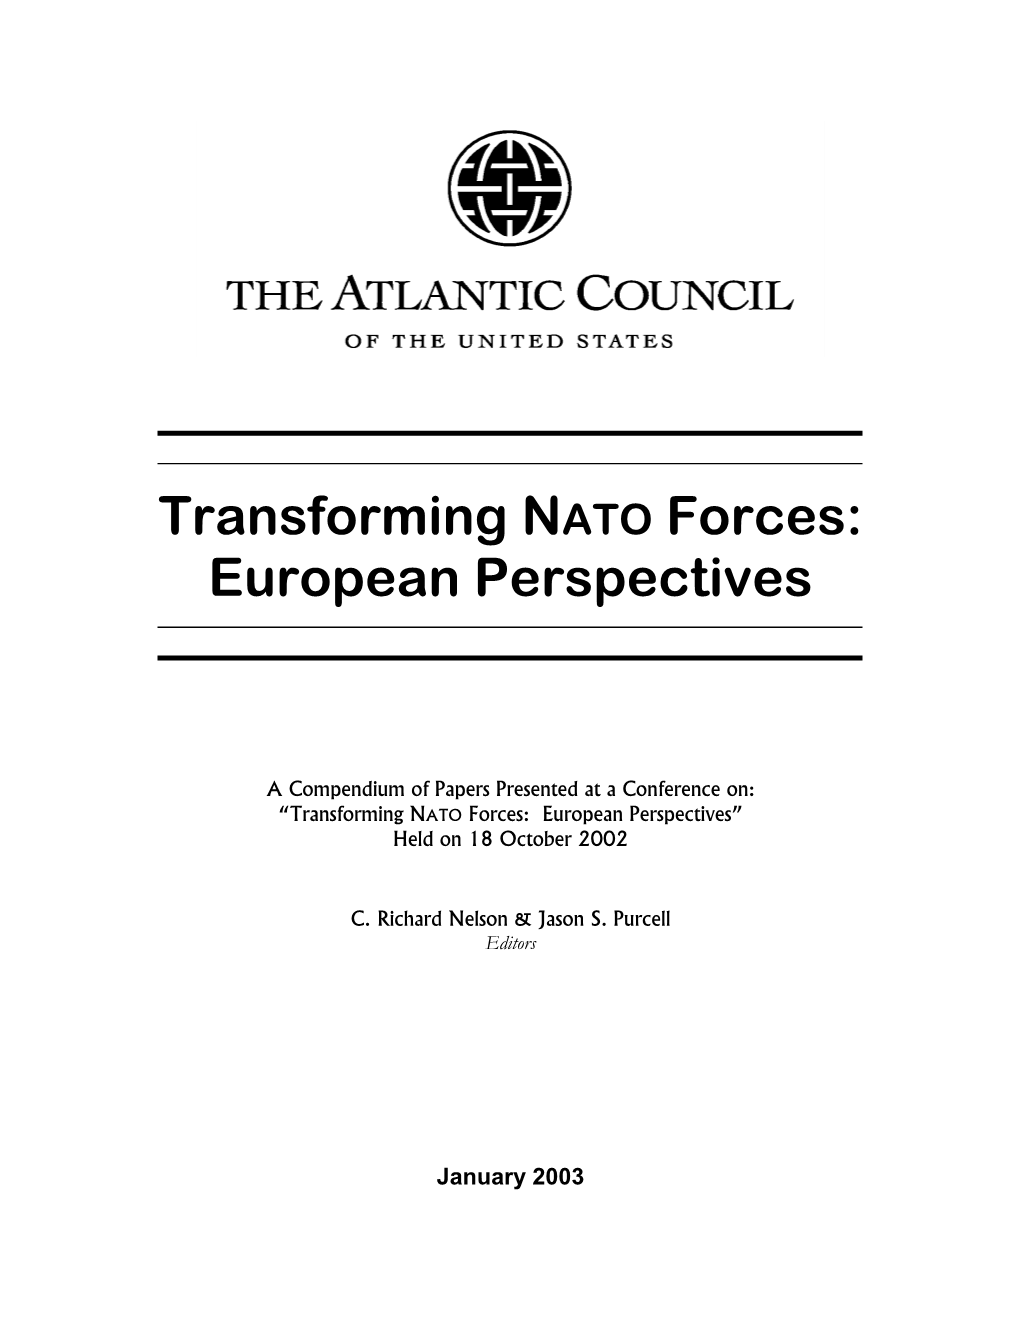 Transforming NATO Forces: European Perspectives